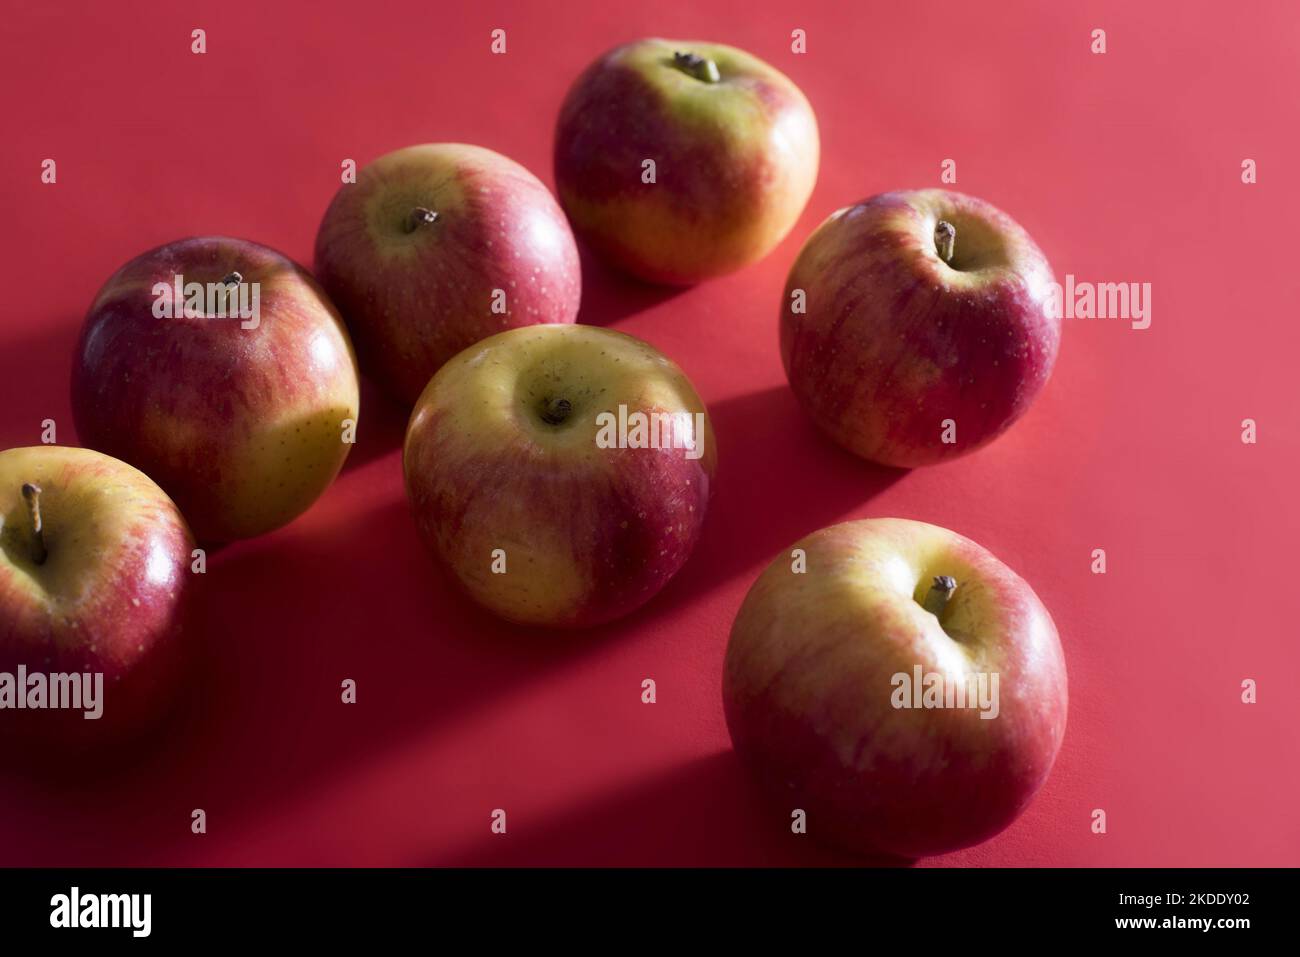 Seven apples backlit by bright light cast shadows on a plain red background. Stock Photo